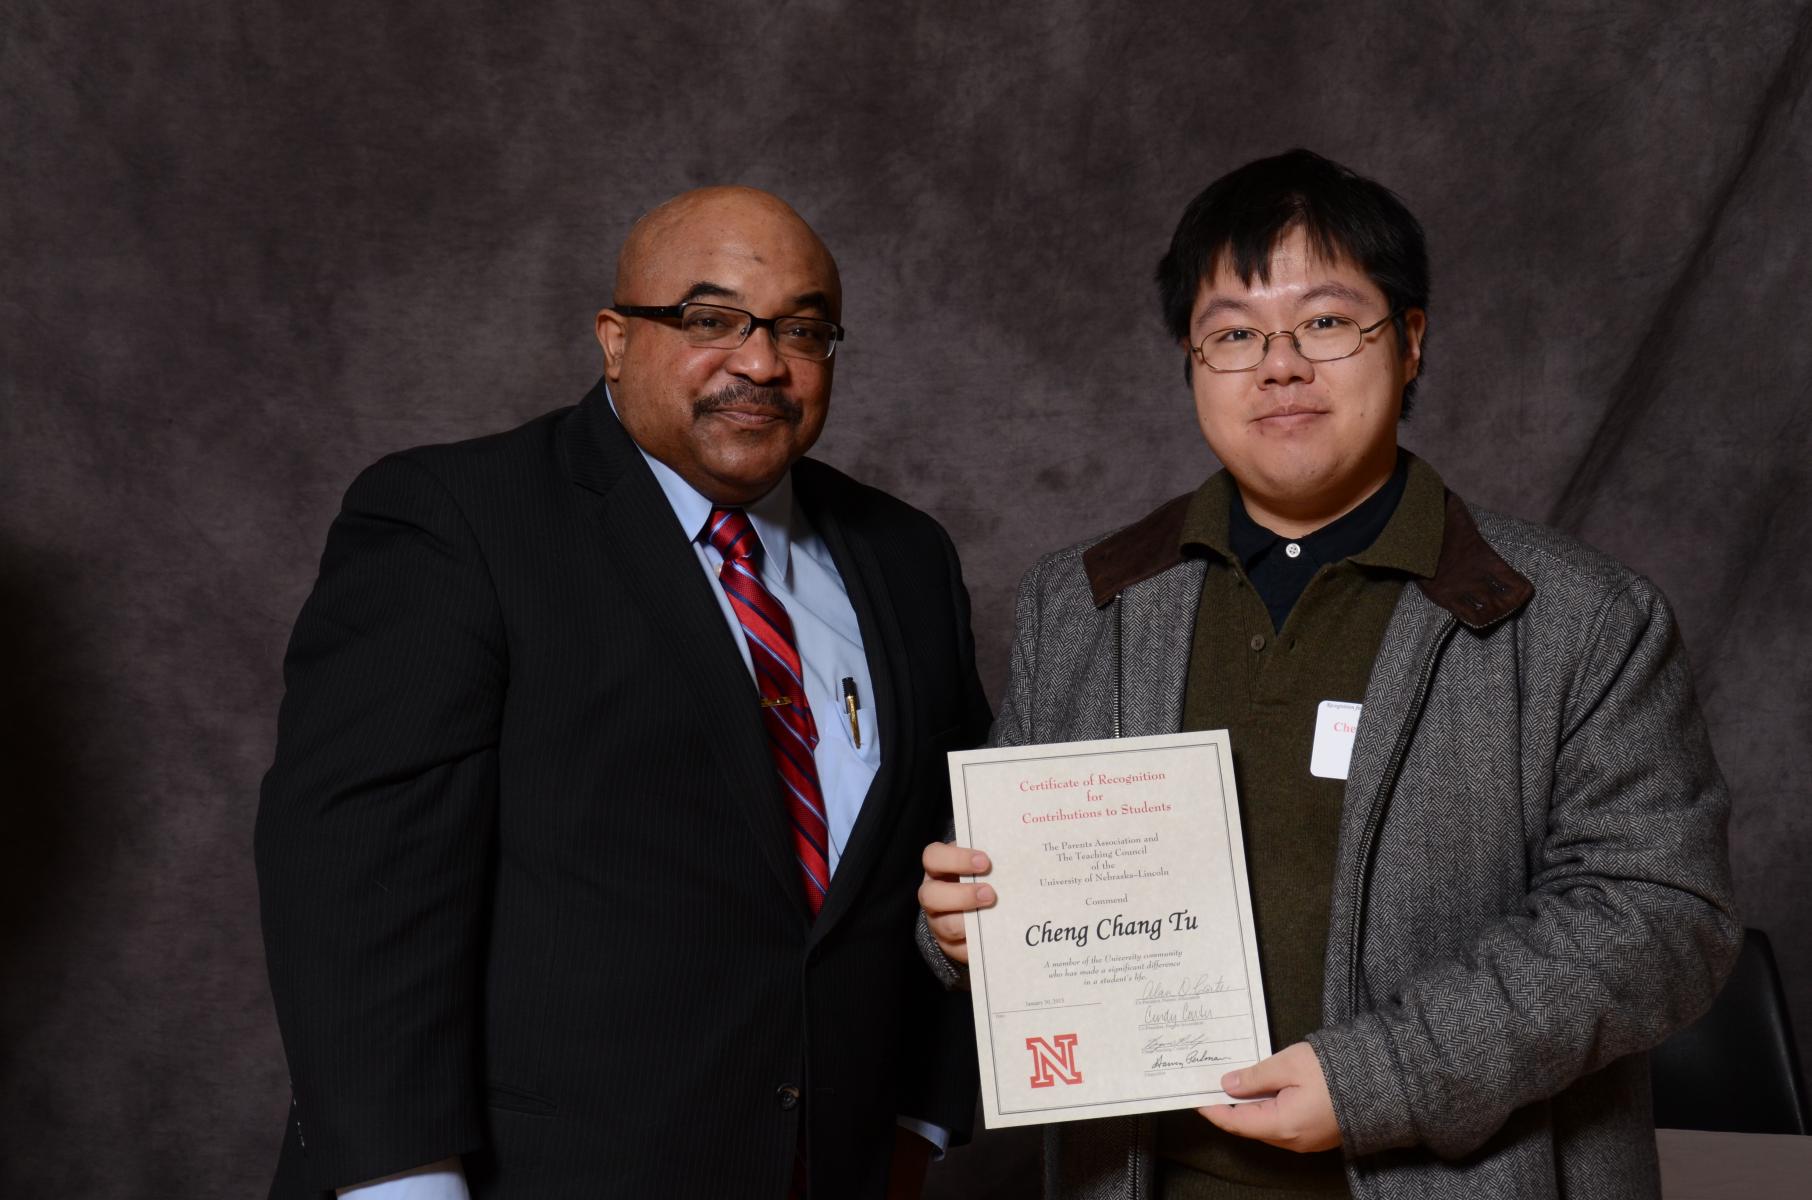 Cheng Chang (Alfred Tu) receiving his award at the 2015 UNL Parents Recognition Ceremony